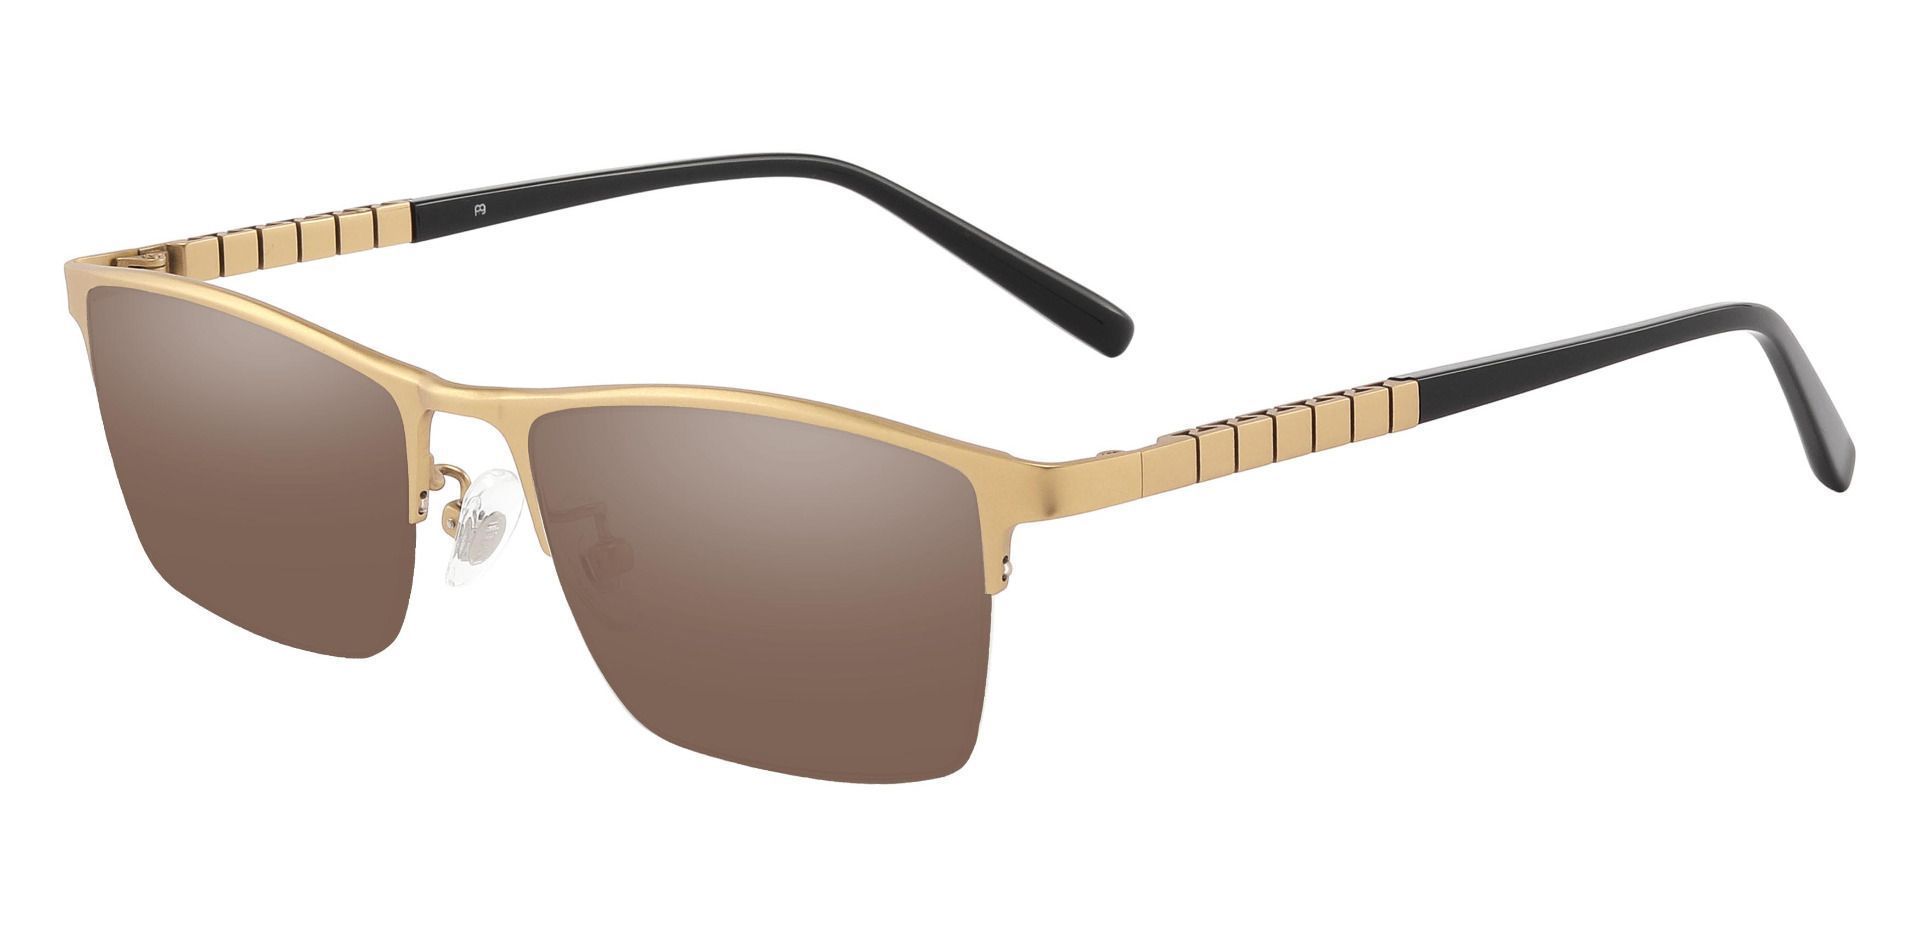 Maine Rectangle Non-Rx Sunglasses - Gold Frame With Brown Lenses